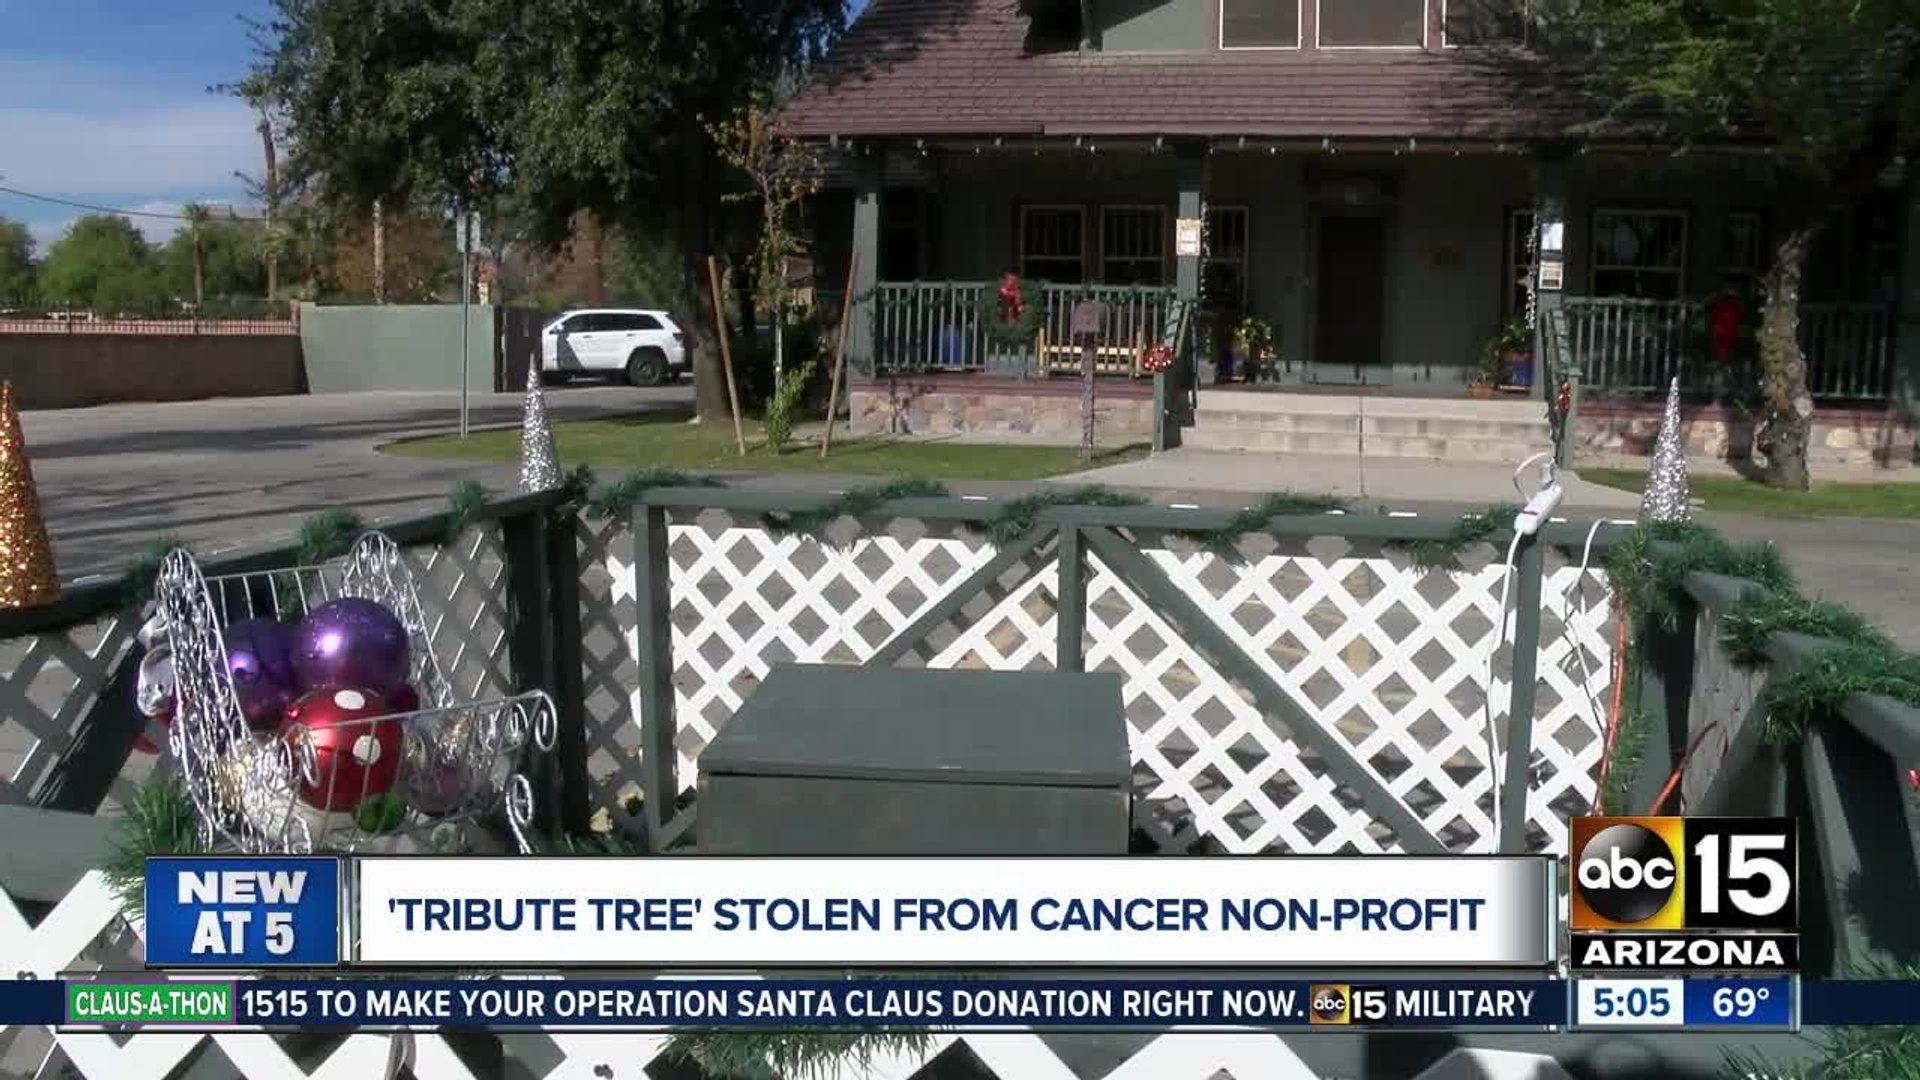 'Tribute tree' stolen from cancer non-profit